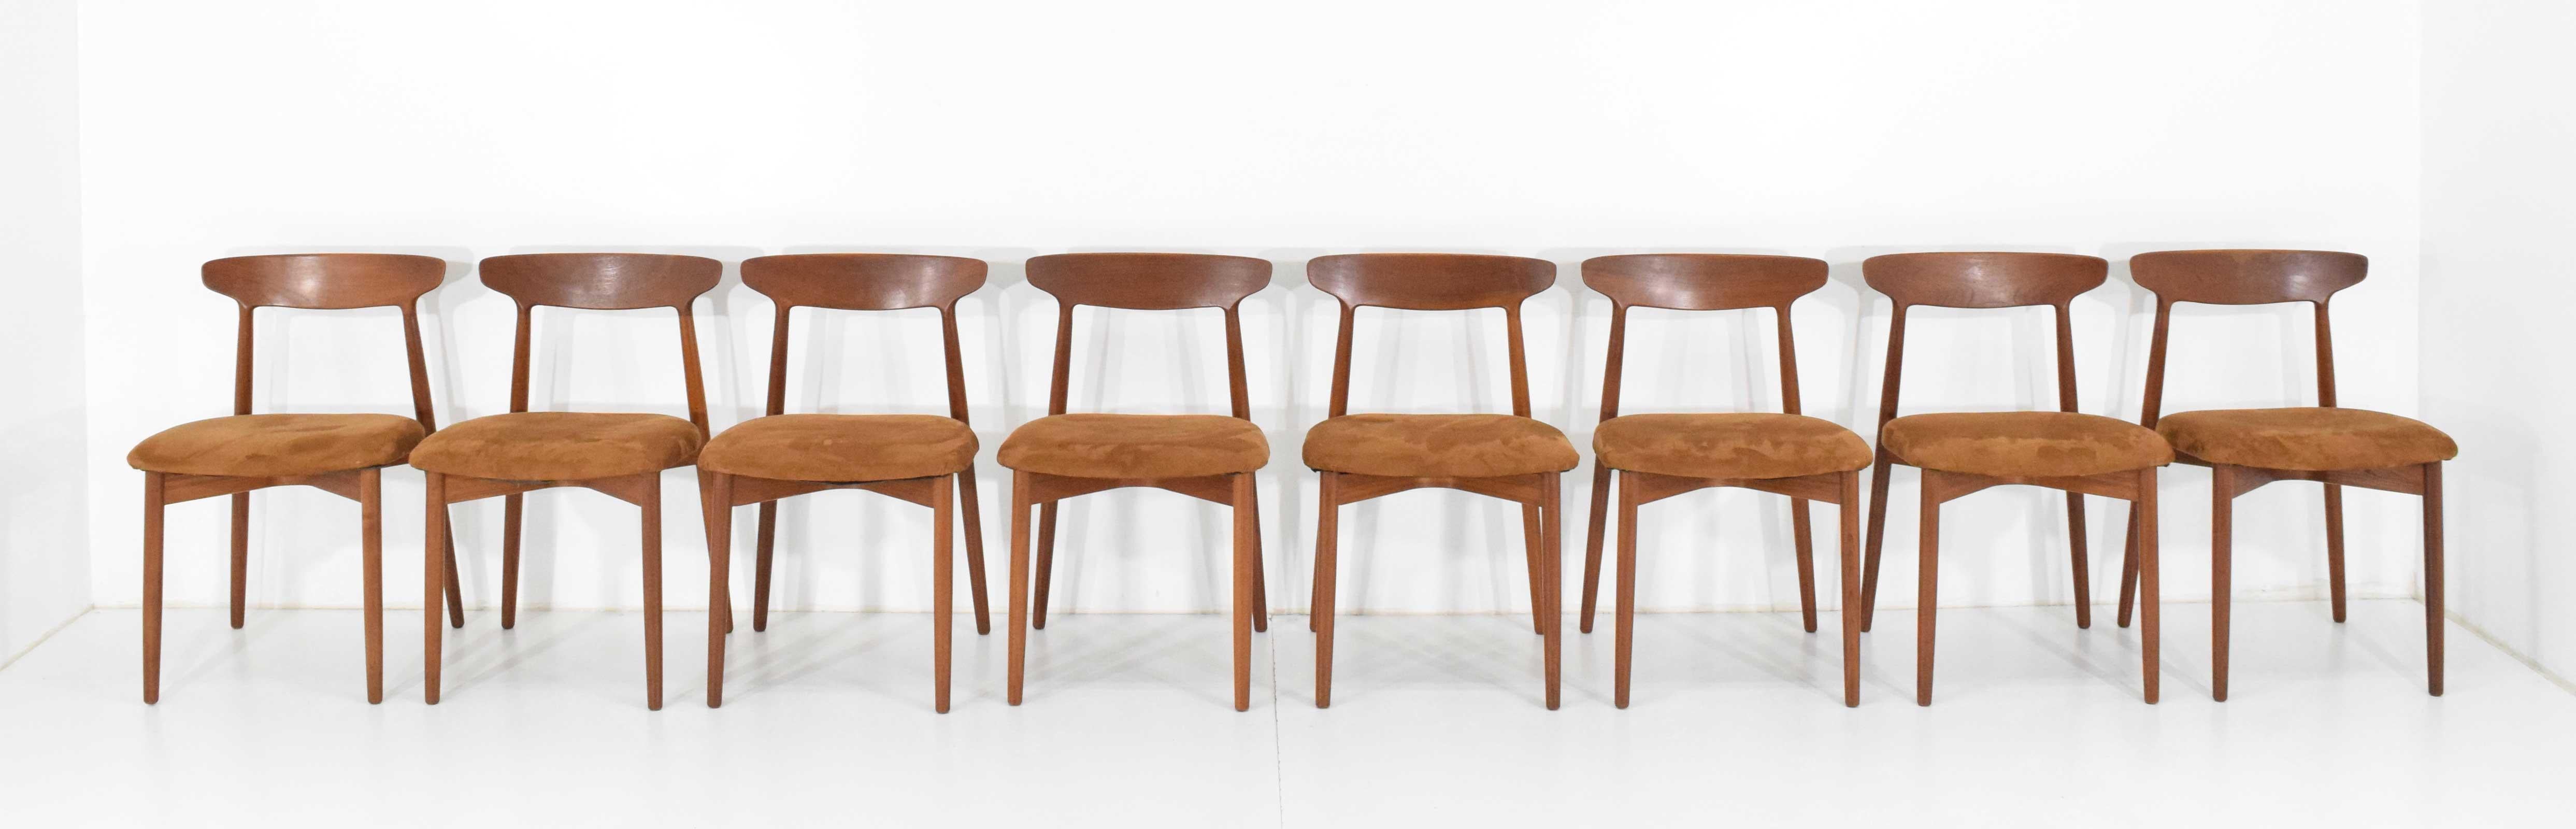 Beautiful set of 1960s dining chairs in teak with padded seats. Chairs are designed by Harry Ostergaard for Randers Møbelfabrik. Excellent quality.